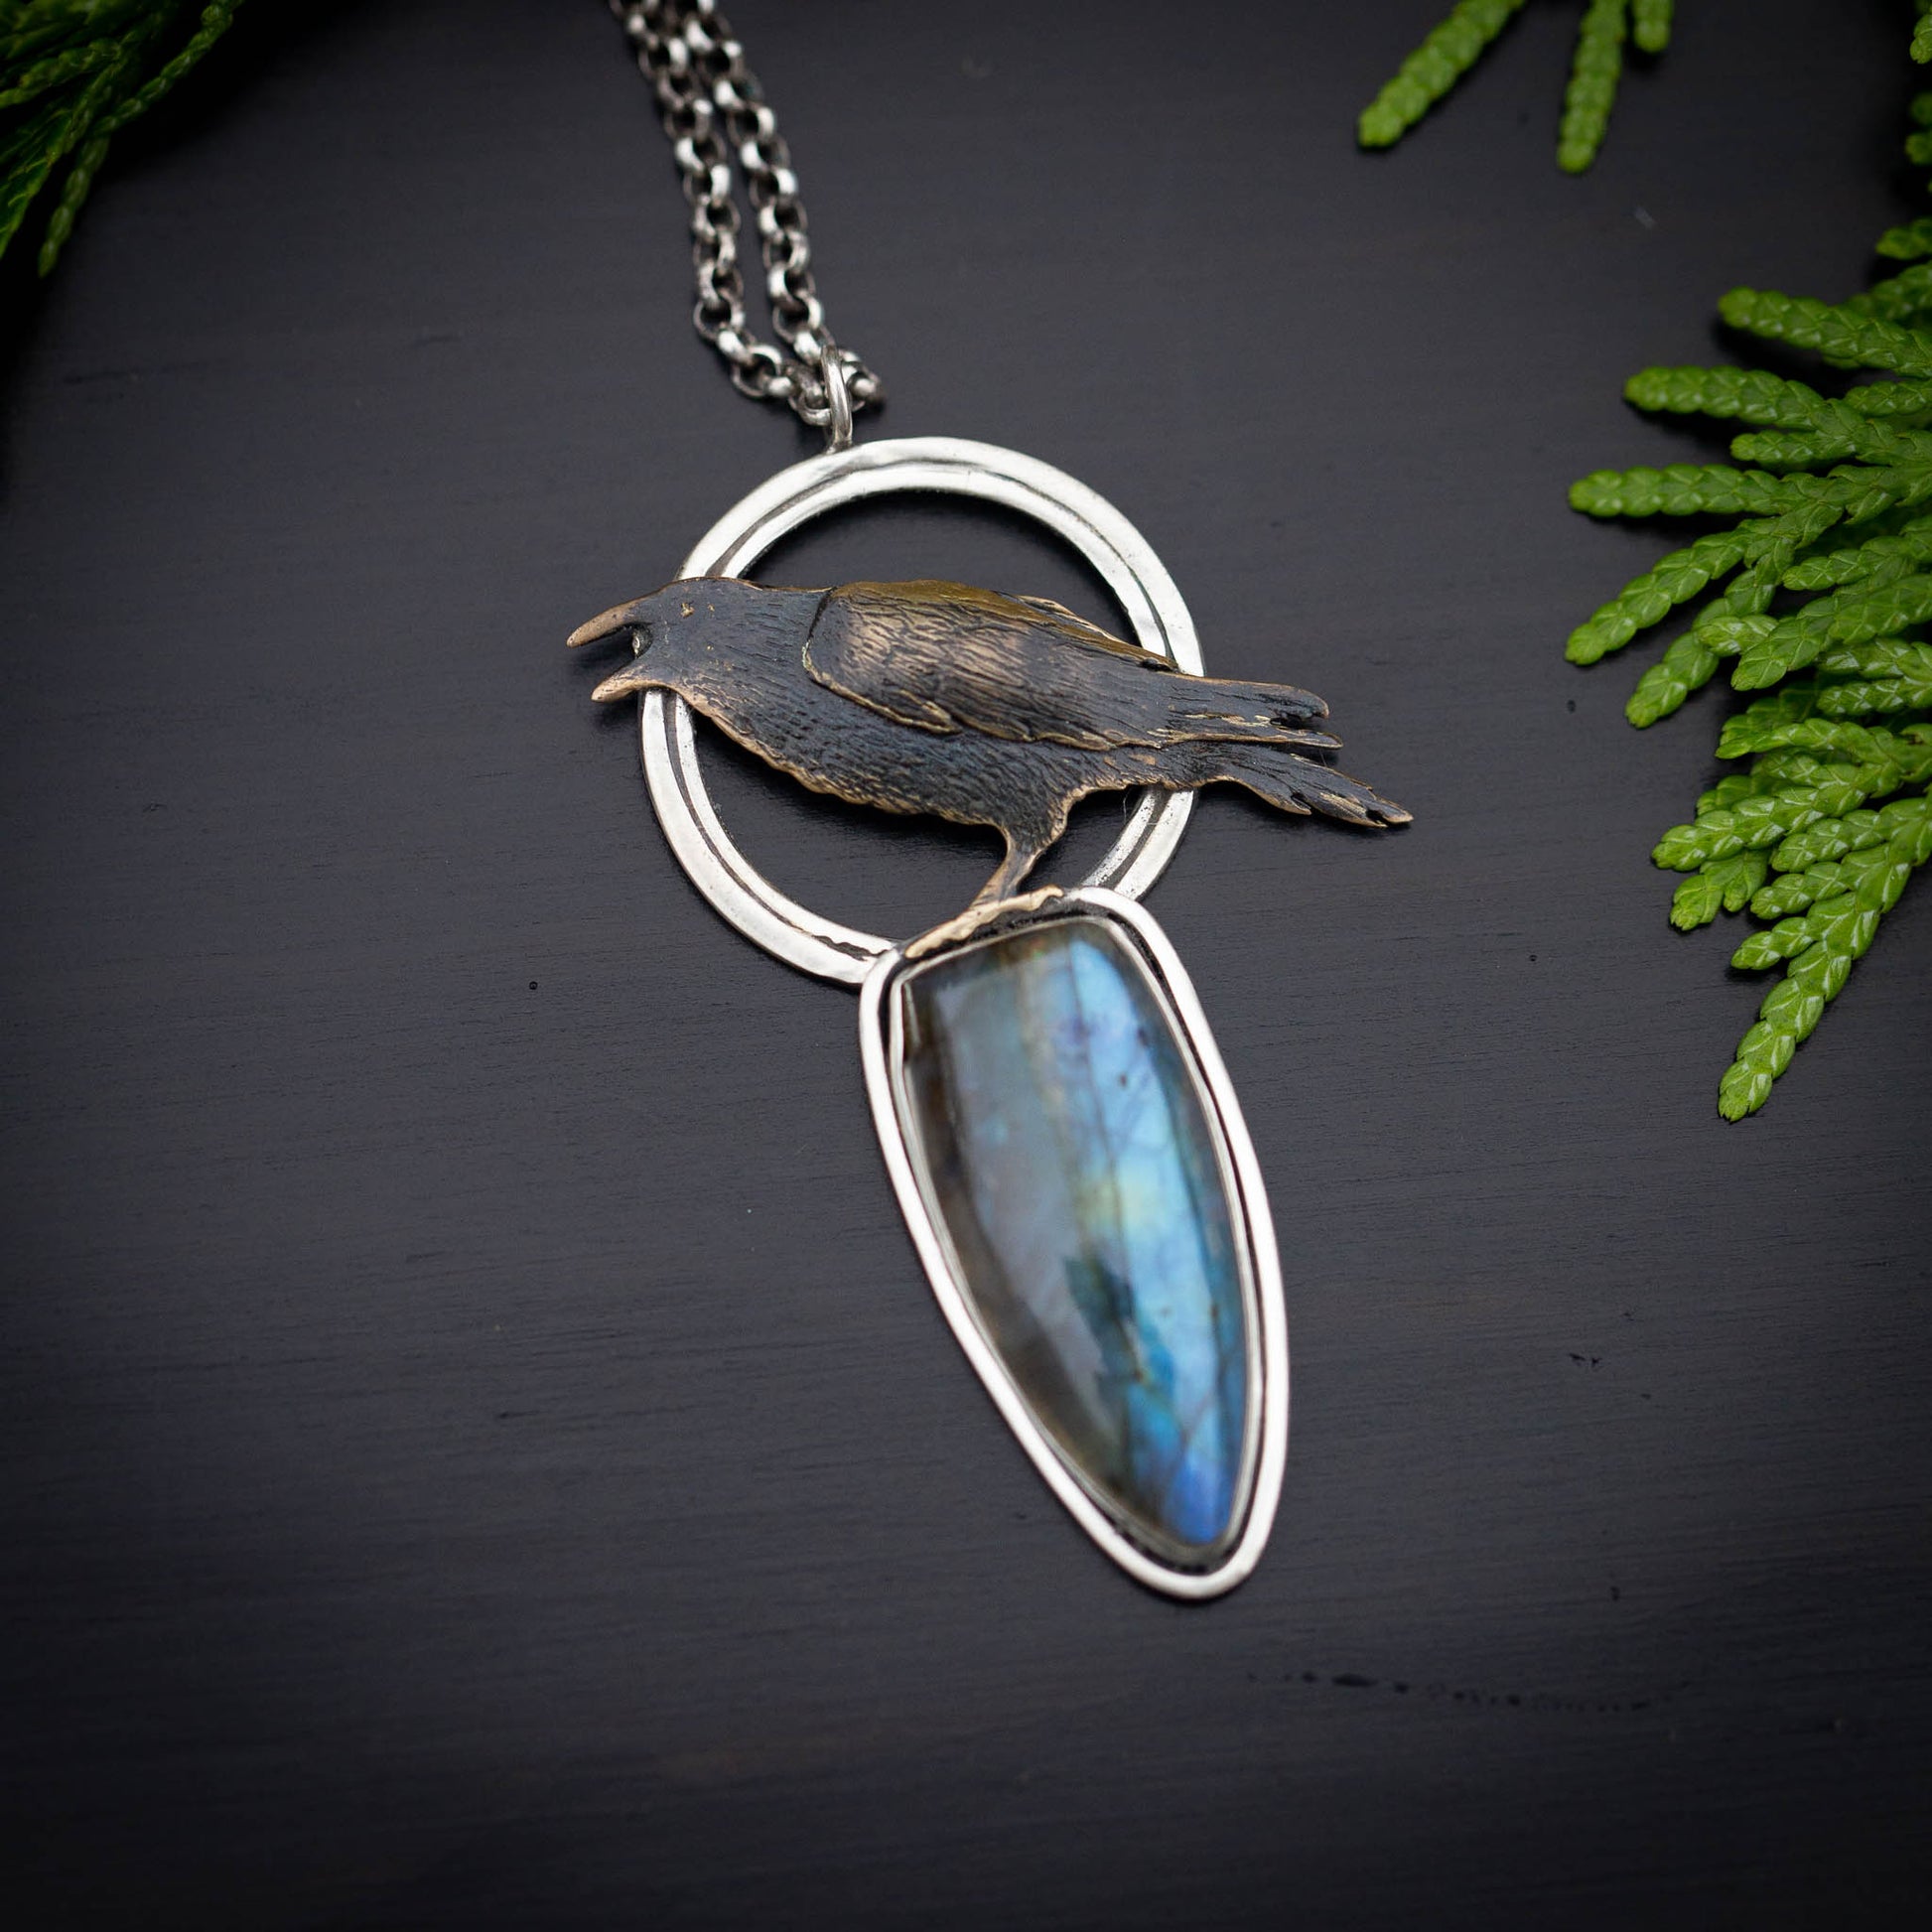 a necklace featuring a brass raven on an open silver circle utop a tear drop labradorite stone shown on a black background